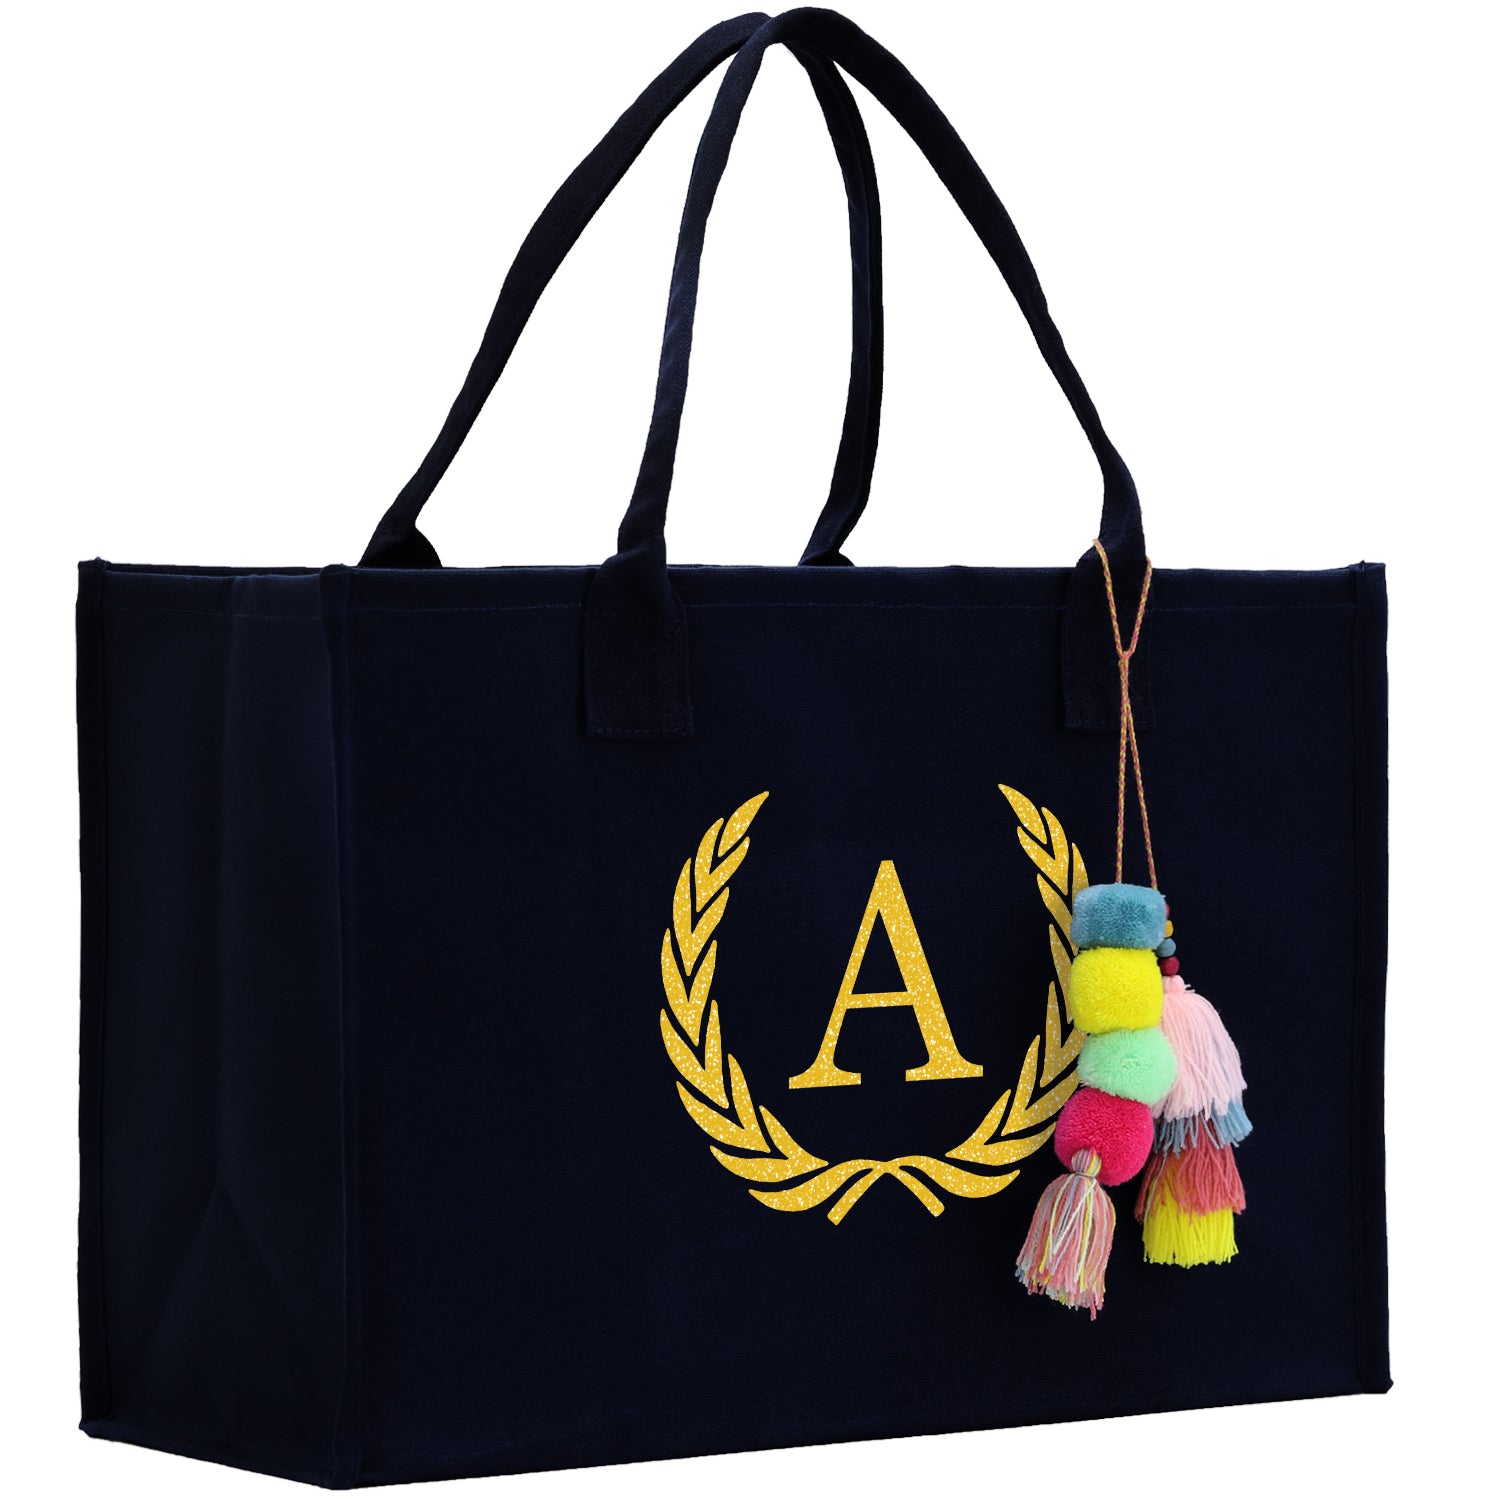 Premium Quality Personalized Gift Monogram Initial 100% Cotton Chic Tote Bag for Women